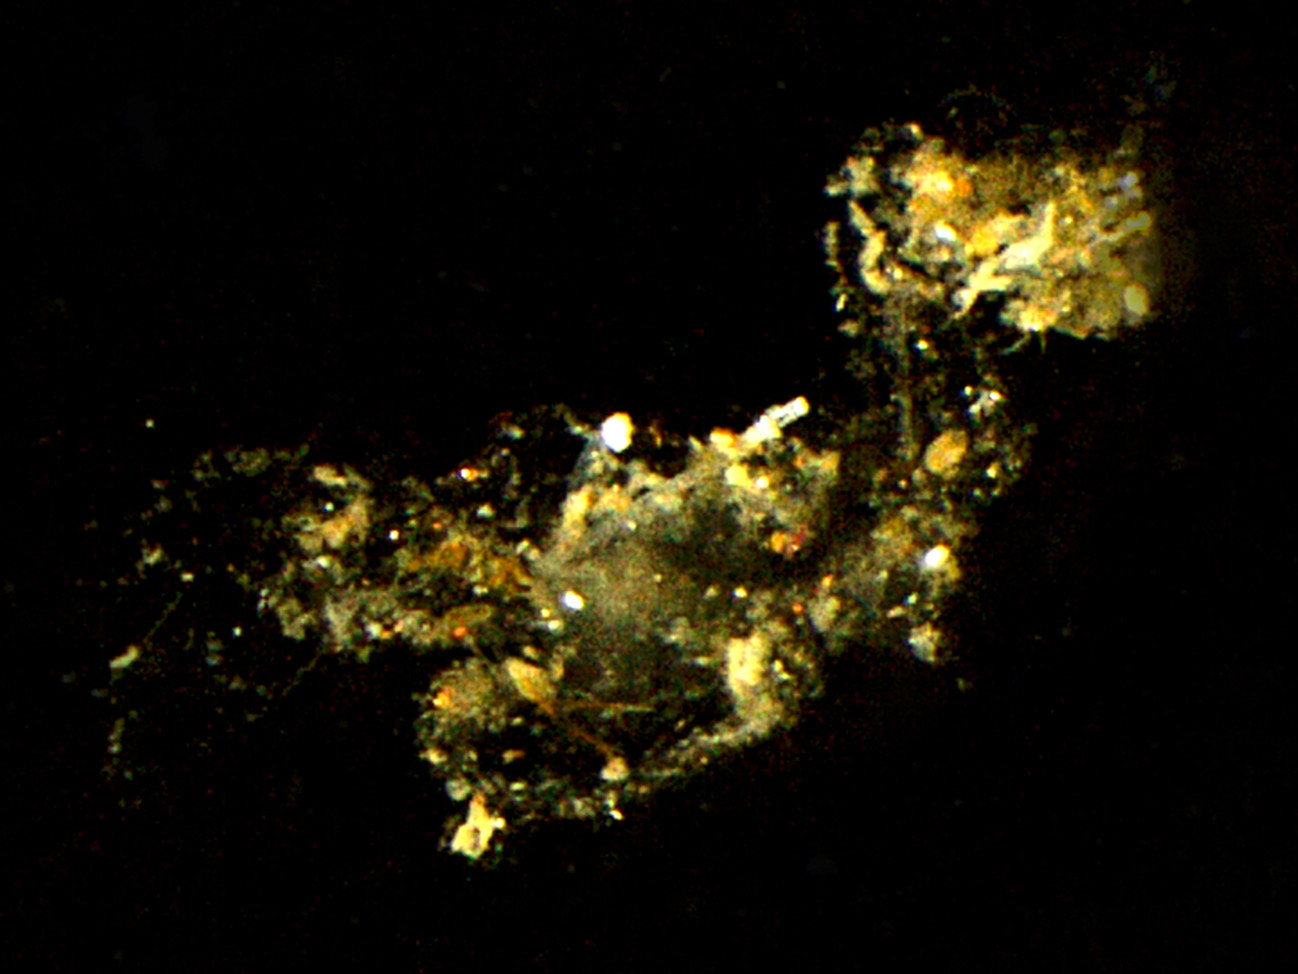 Small marine “snowflakes” are very important for the nutrient balance of the oceans. The particle shown here is highly magnified – in reality small particles are only about the size of a hair and thus barely visible. (© Max Planck Institute for Marine Microbiology/C. Karthäuser and S. Ahmerkamp)